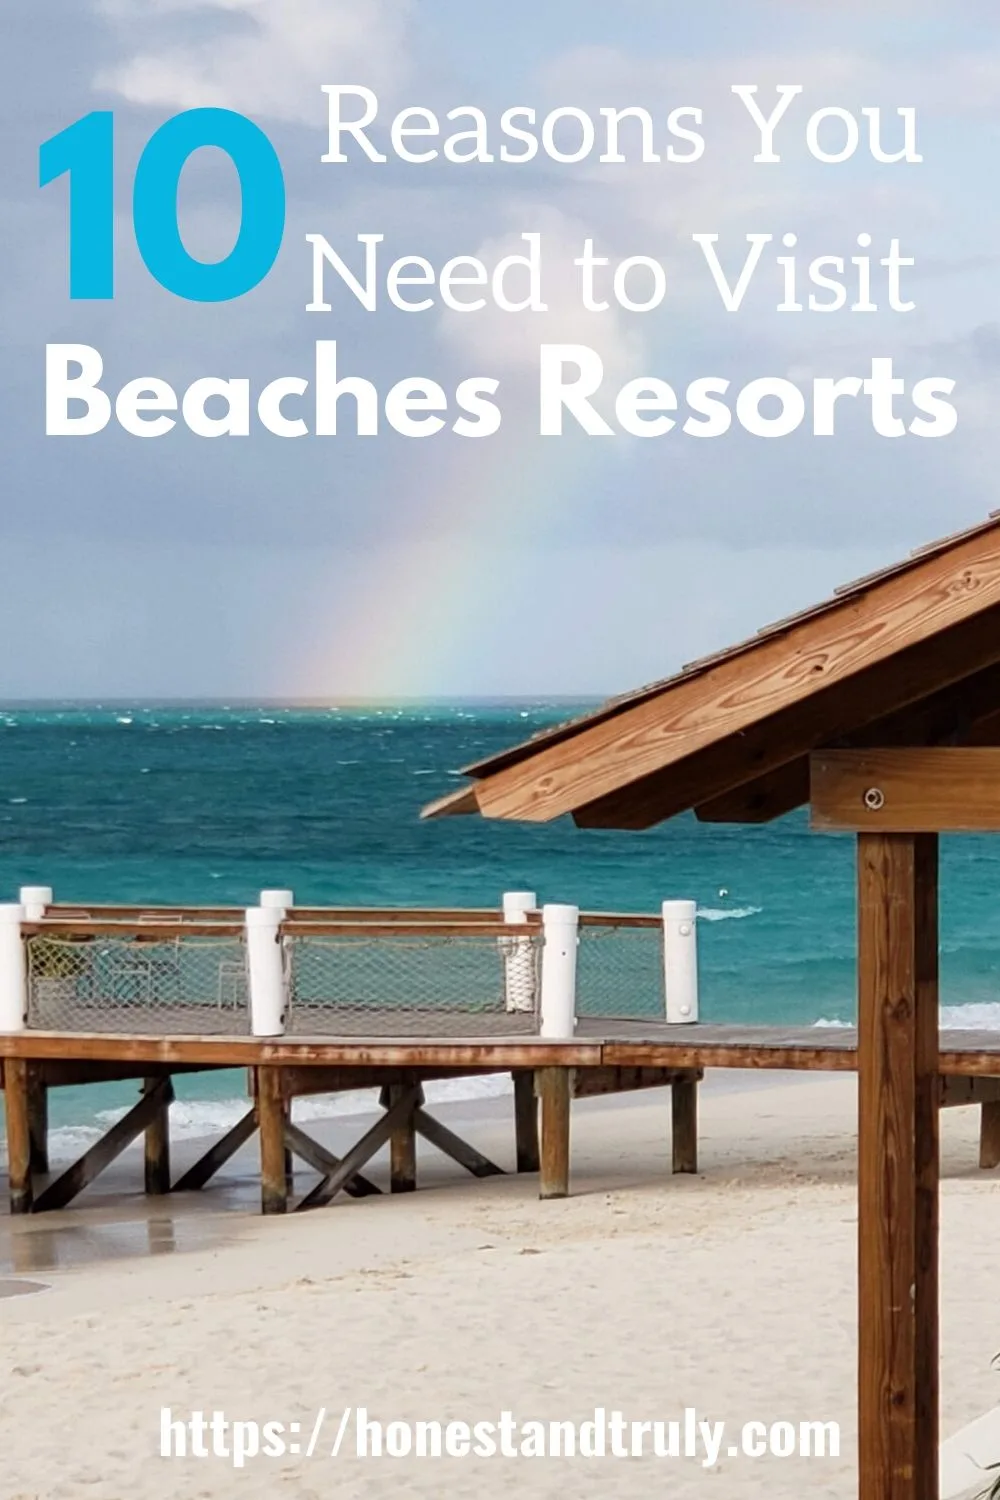 Beaches Turks & Caicos: 10 Things To Know Before You Go